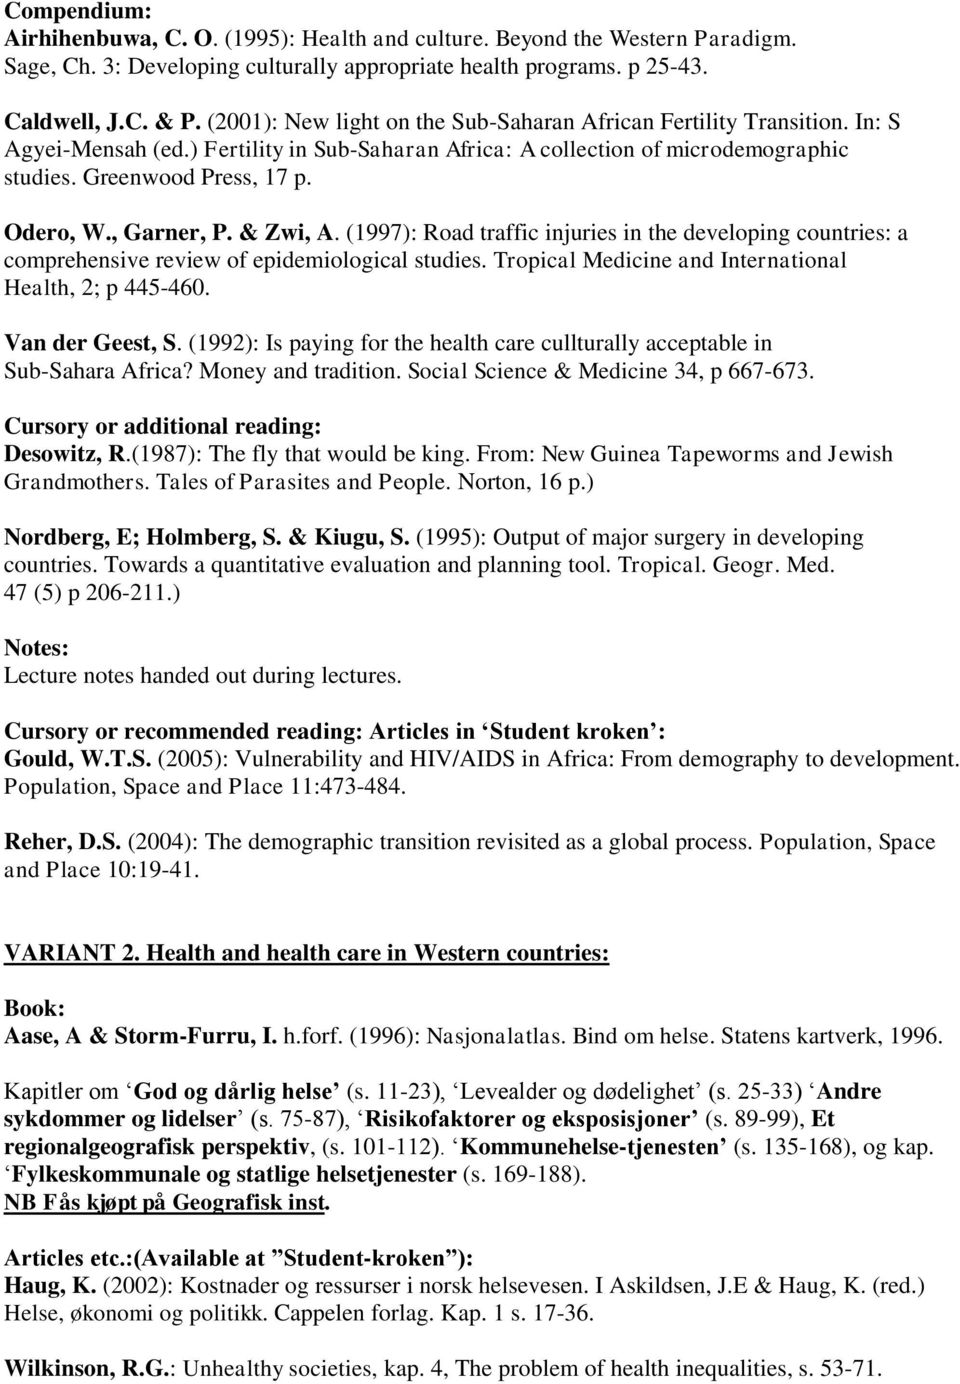 , Garner, P. & Zwi, A. (1997): Road traffic injuries in the developing countries: a comprehensive review of epidemiological studies. Tropical Medicine and International Health, 2; p 445-460.